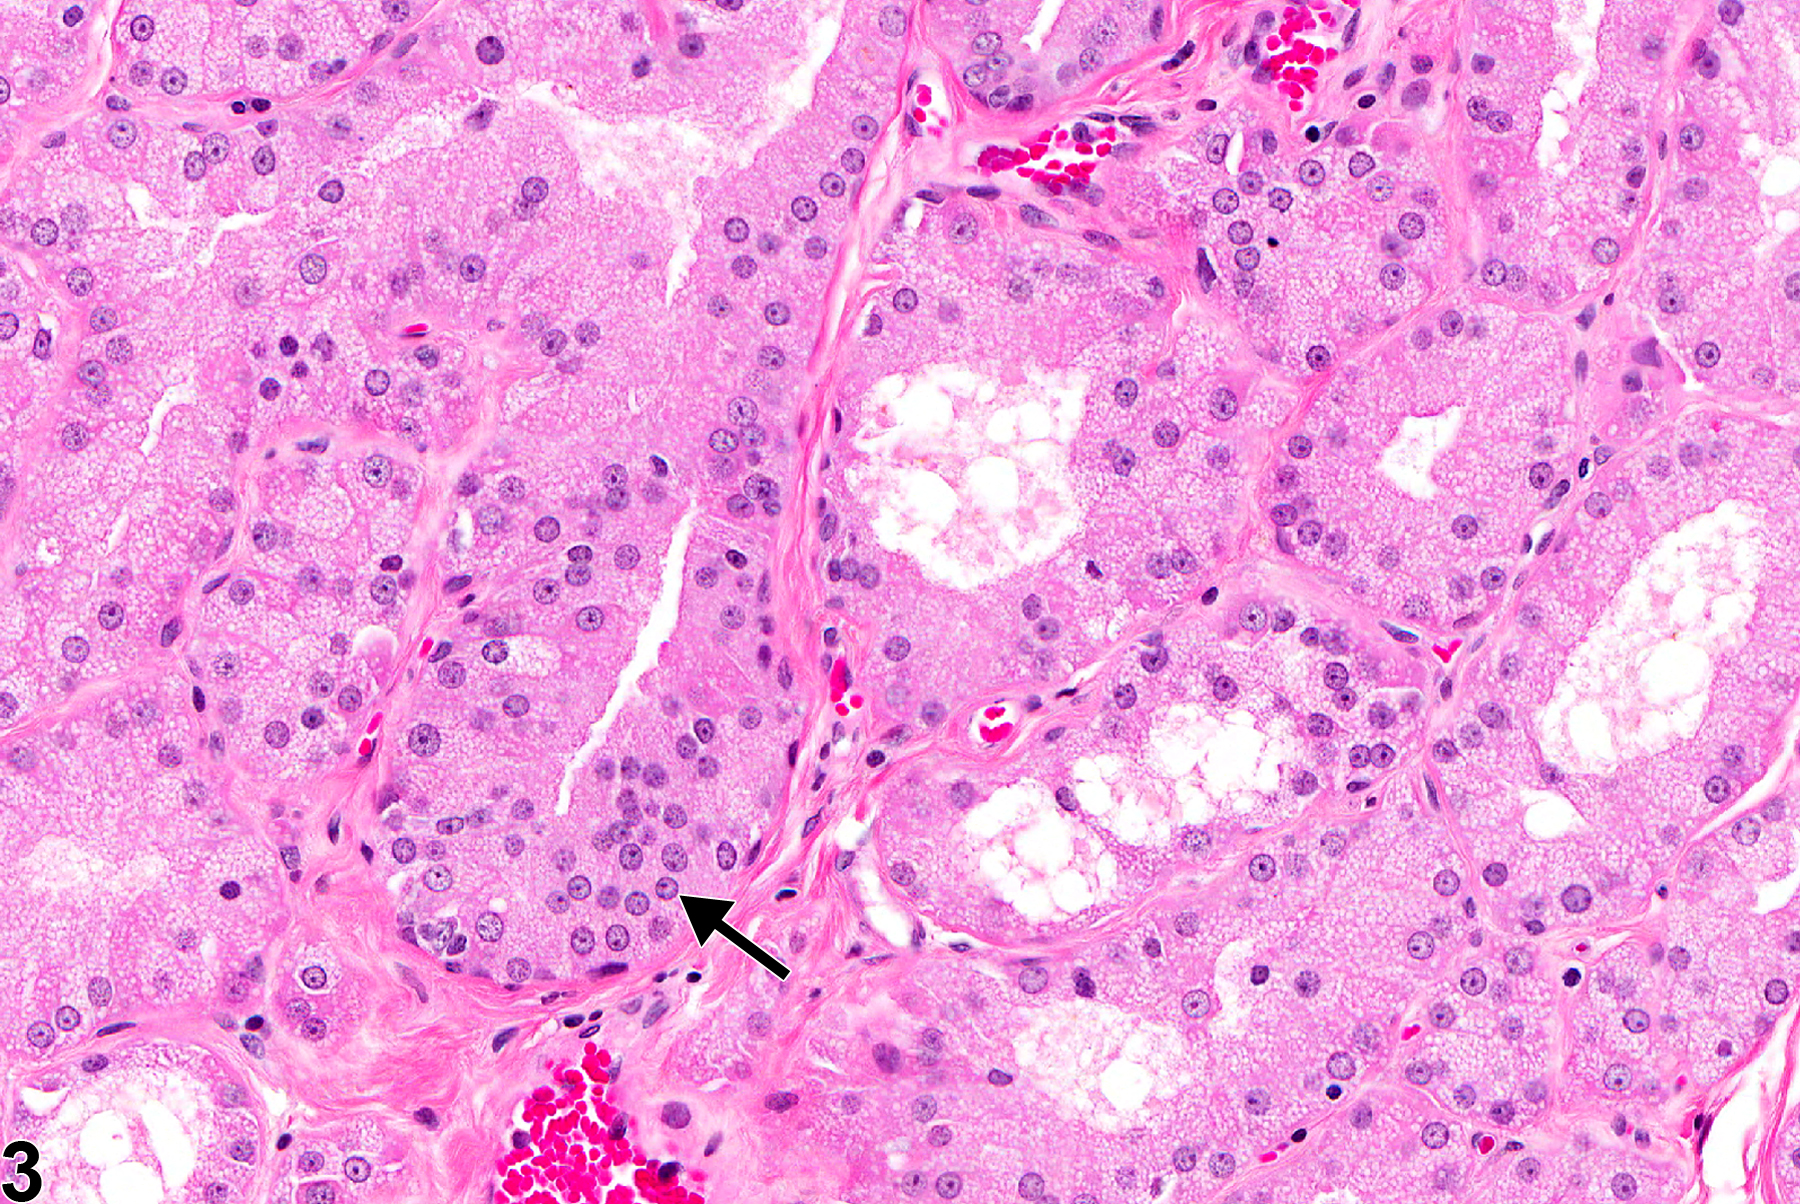 Image of hyperplasia in the Harderian gland from a male F344/N rat in a chronic study